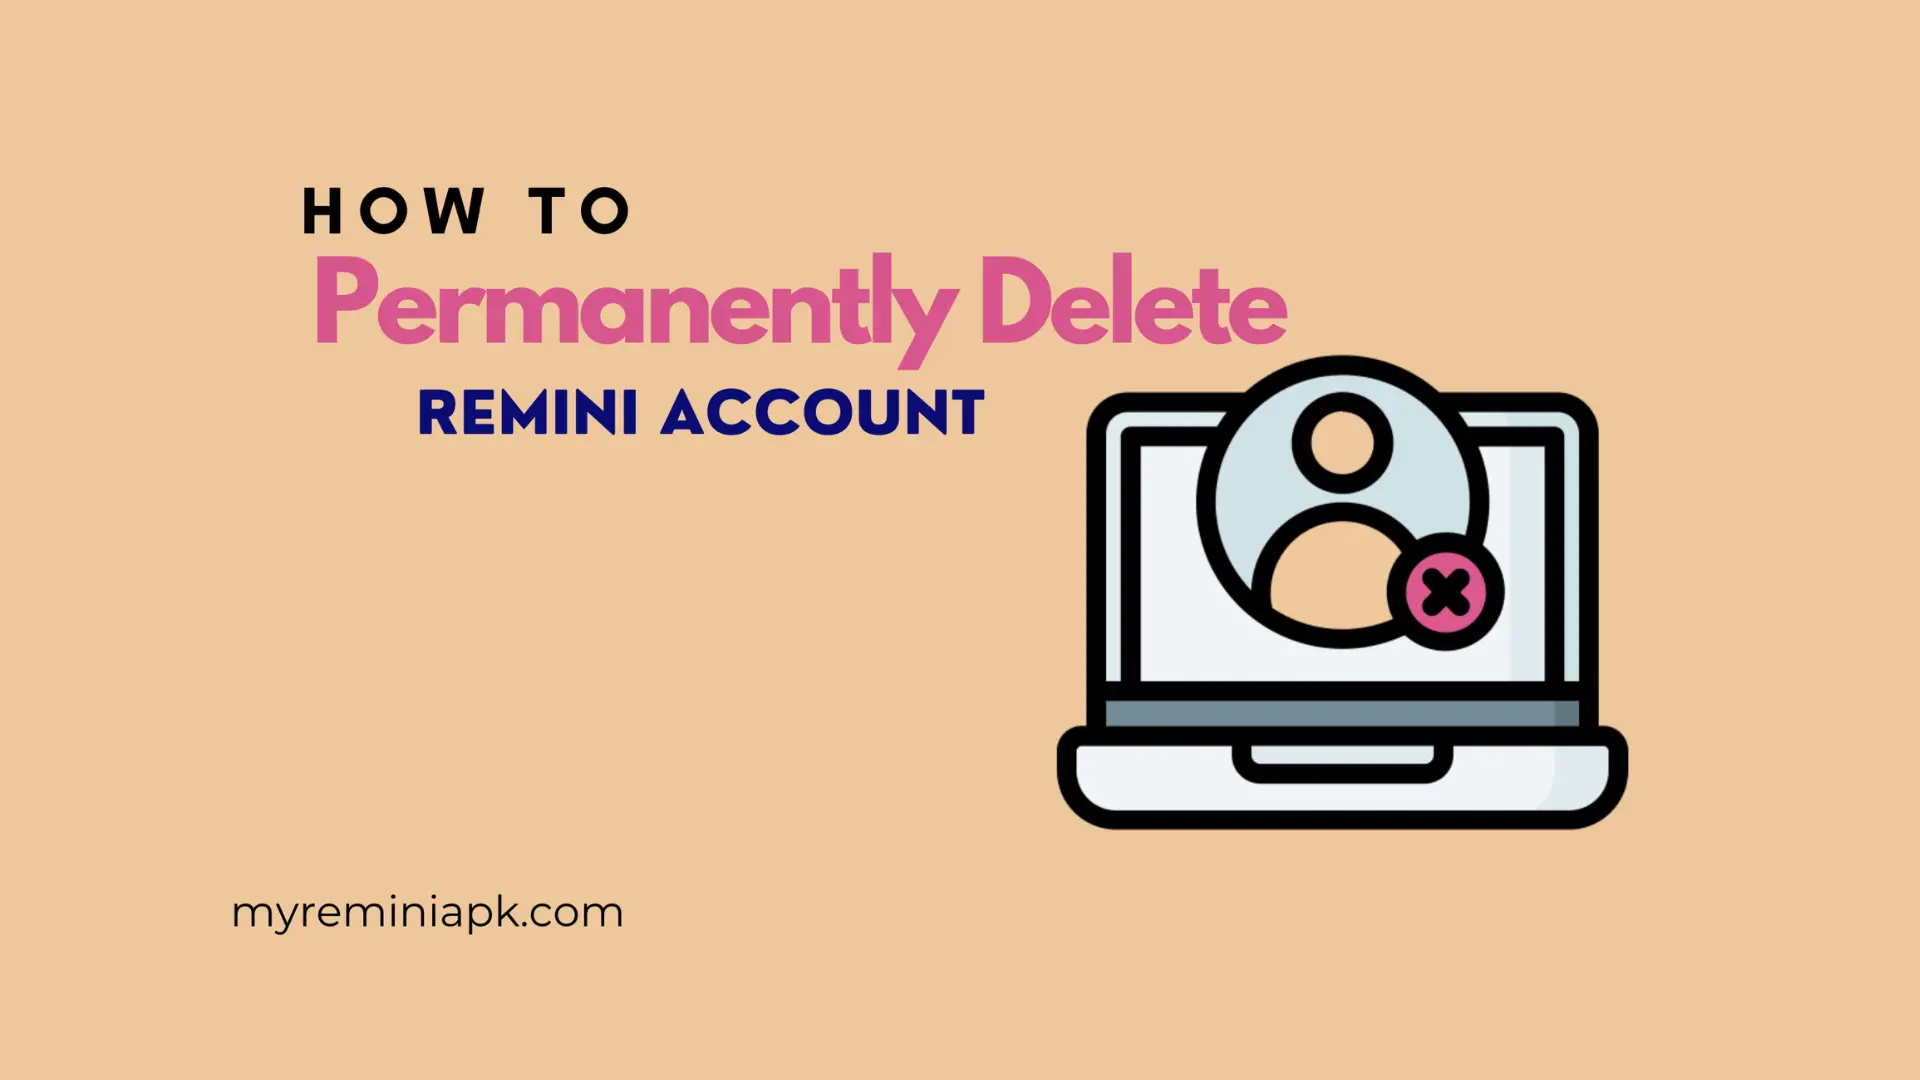 How to Permanently Delete Your Remini Account?